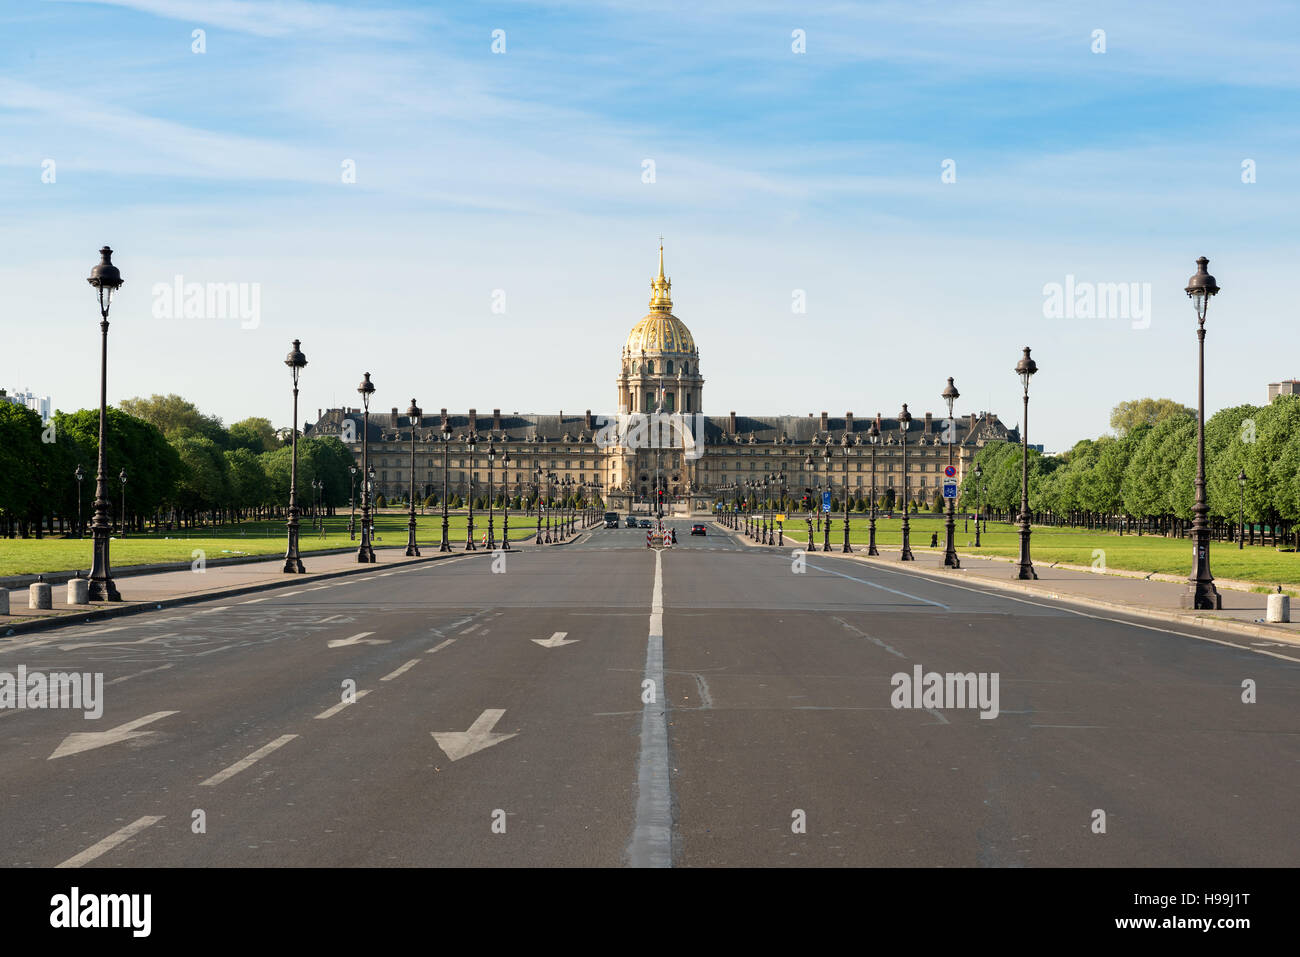 Les Invalides (National Residence of the Invalids) - complex of museums and monuments in Paris, France. Stock Photo